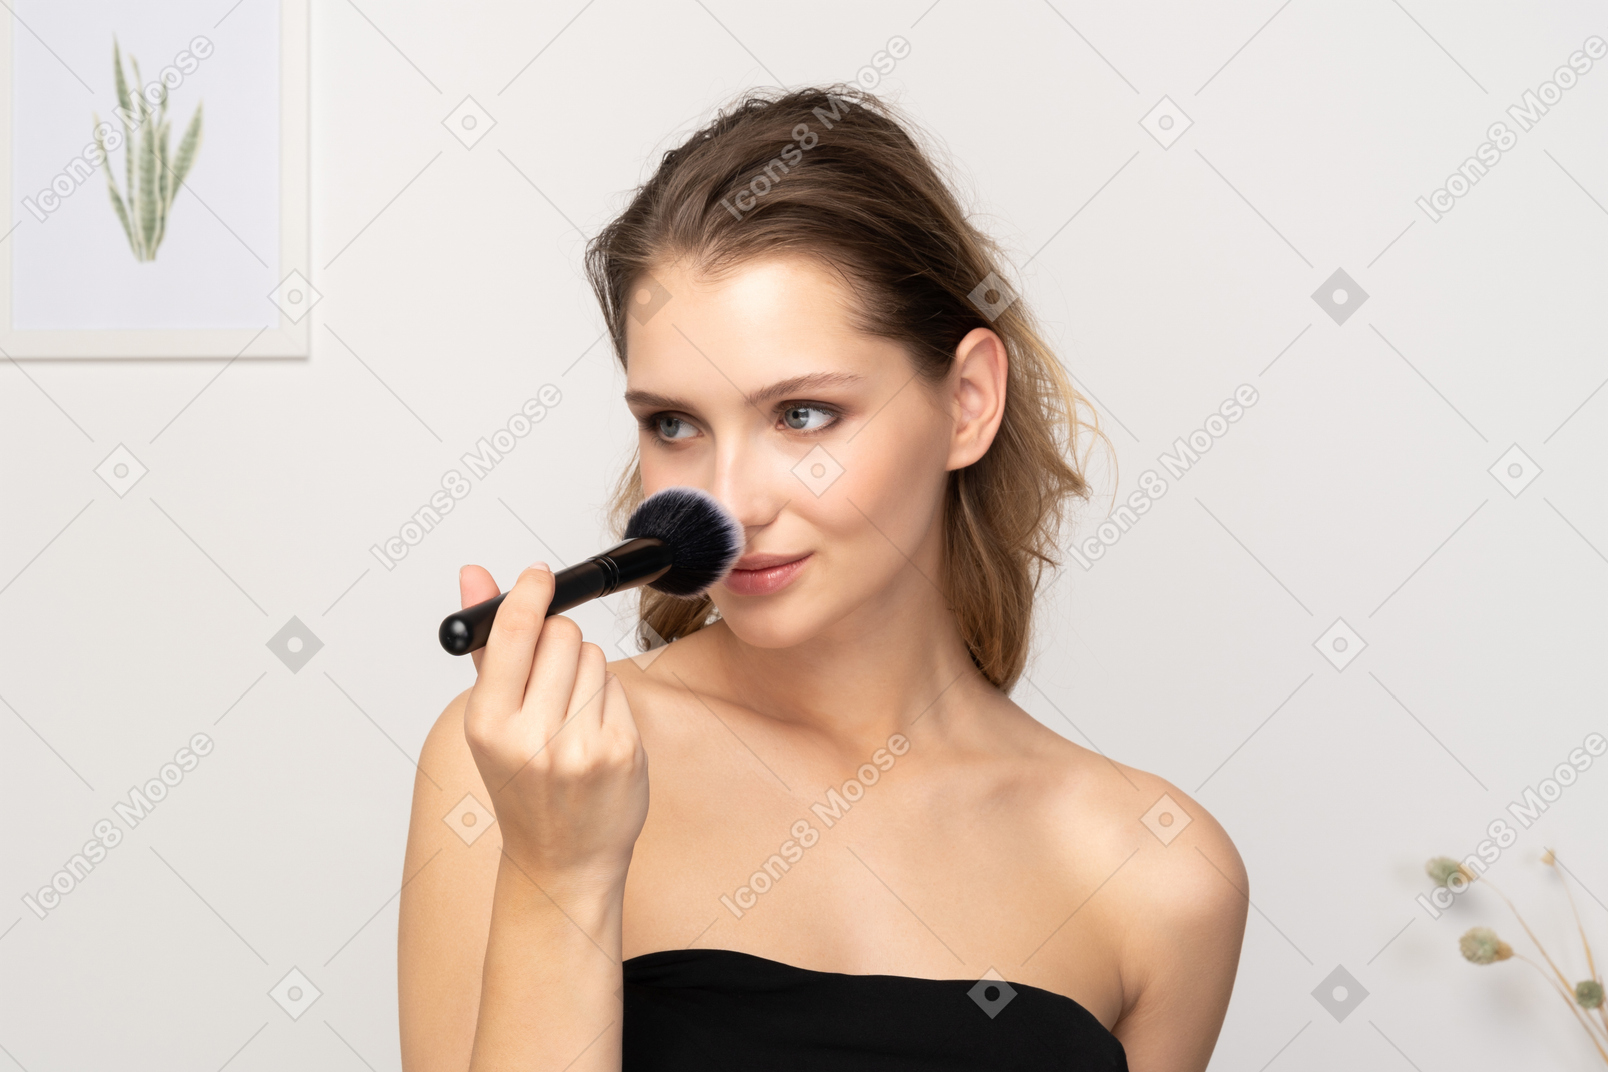 Front view of a young woman applying powder on her nose